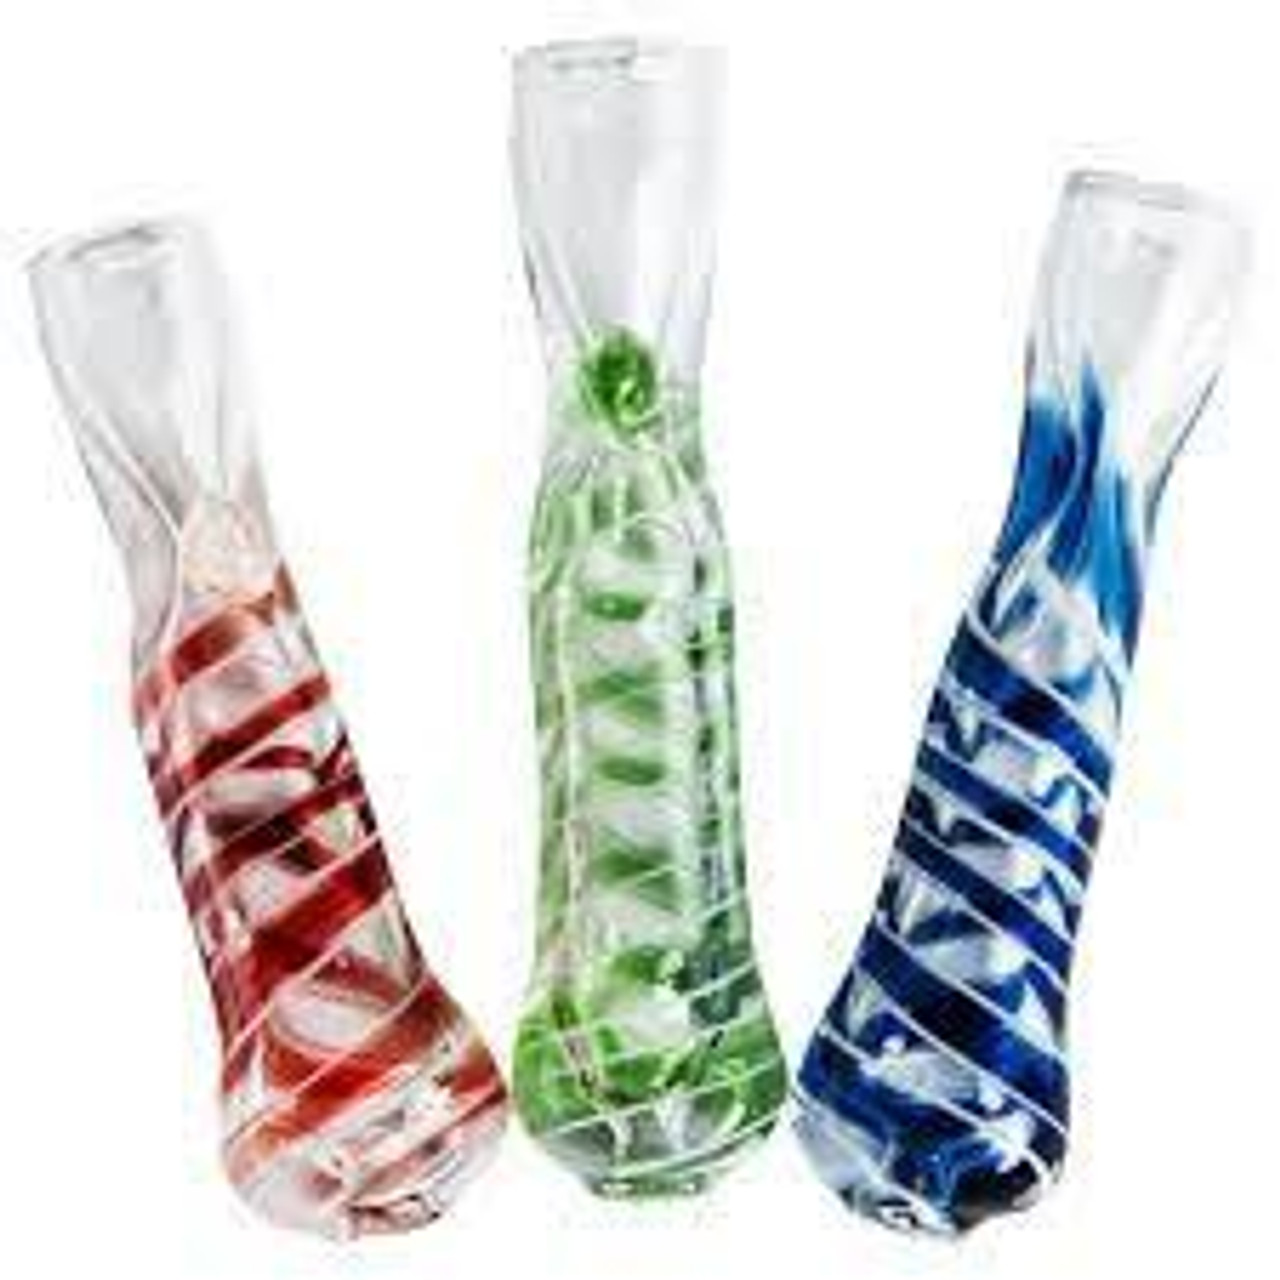 THICKER Glass Chillum Pipe, 3-in-1 Cleaning Tool / Poker Set 4 Brass  Screens One Hitter Bat Pipes for Smoking Thick Sized Glass Bat 